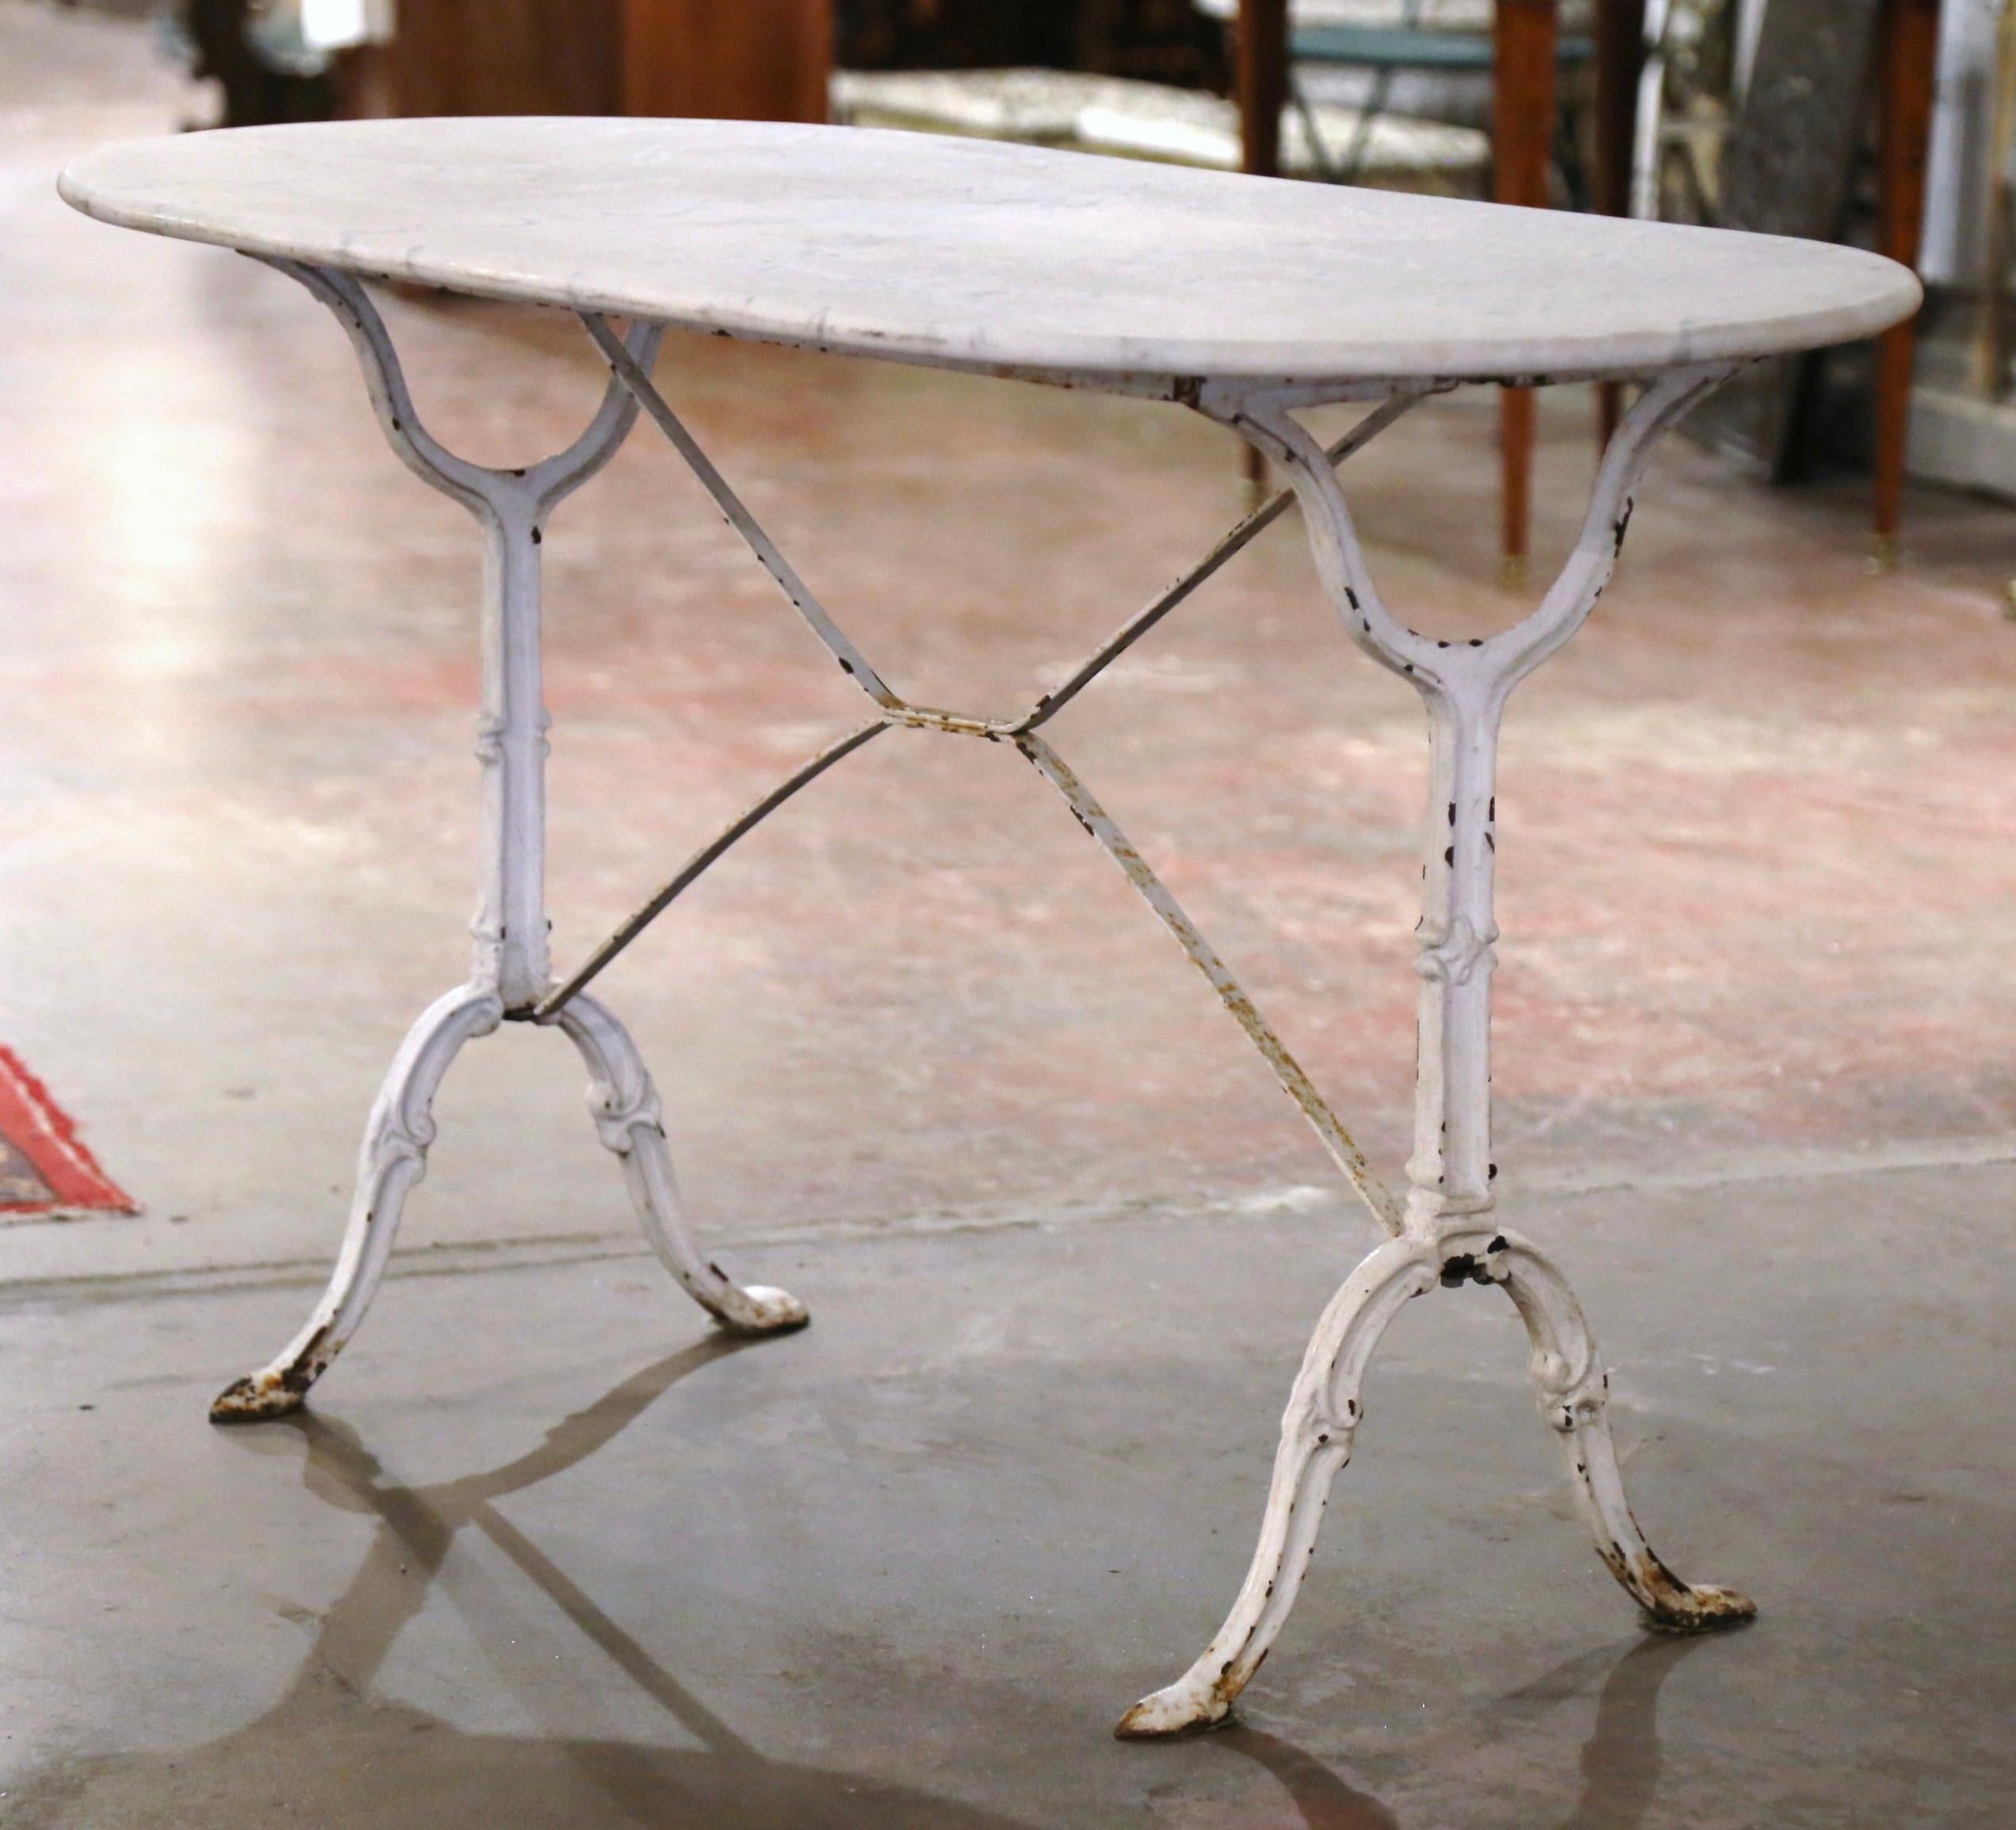 Decorate a patio or covered porch with this elegant antique oval bistrot table. Crafted in France circa 1950, the cast iron table sits on a trestle base with elegant scroll legs ending with hoof feet, and joined together with a double decorative